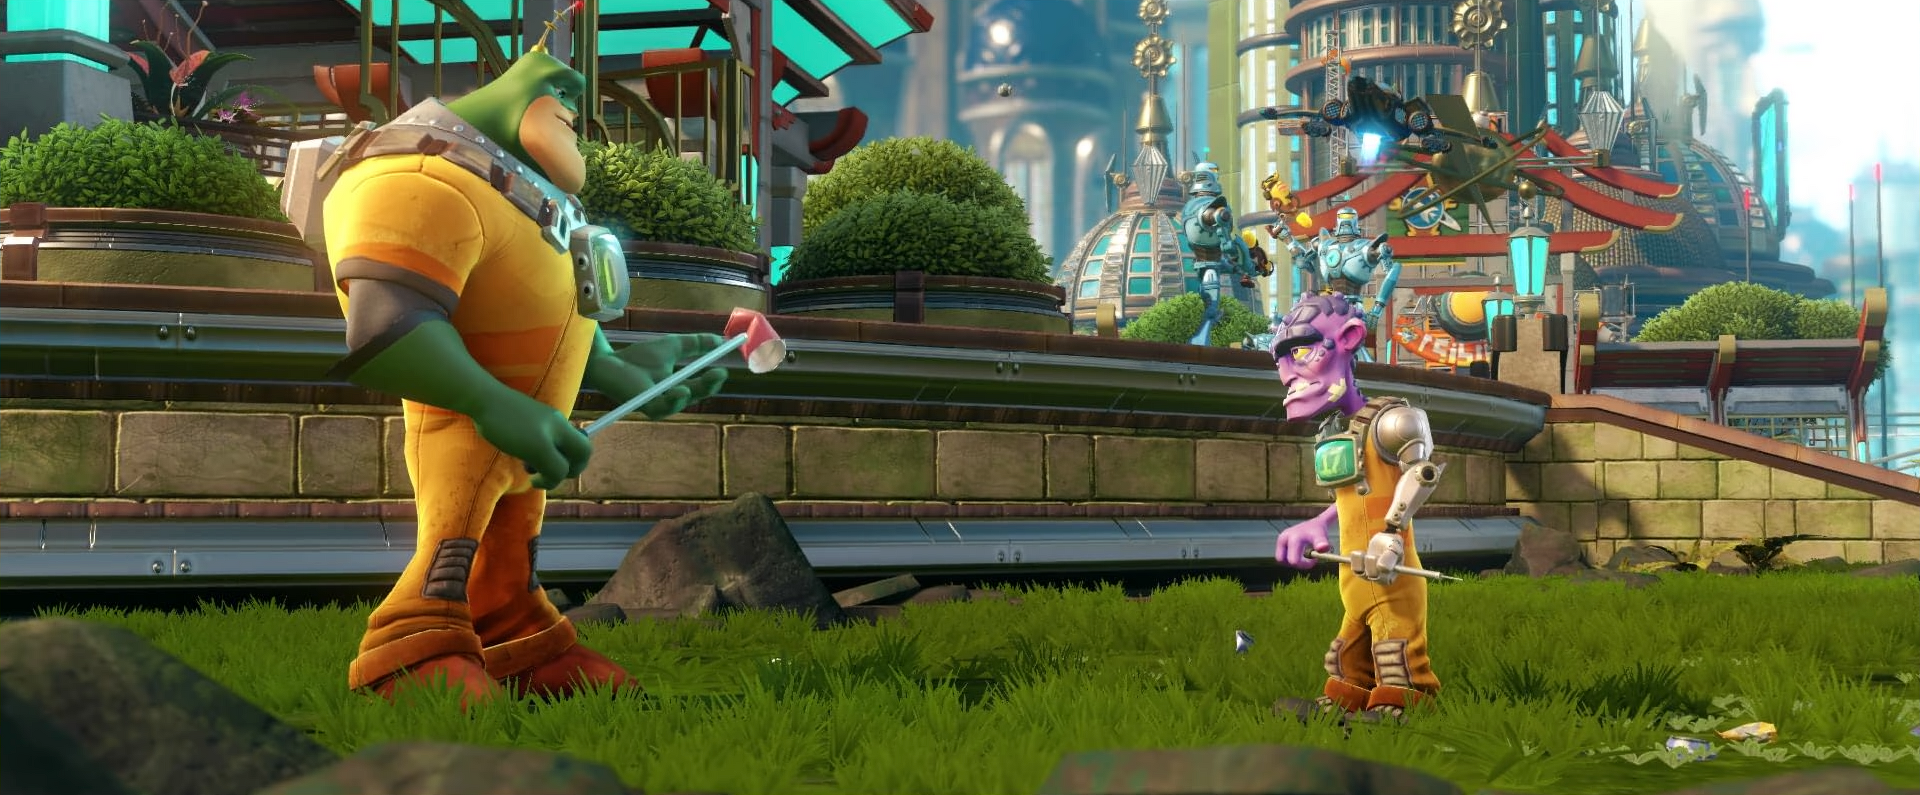 PS4 Ratchet & Clank Game Delayed to Spring 2016 - GameSpot